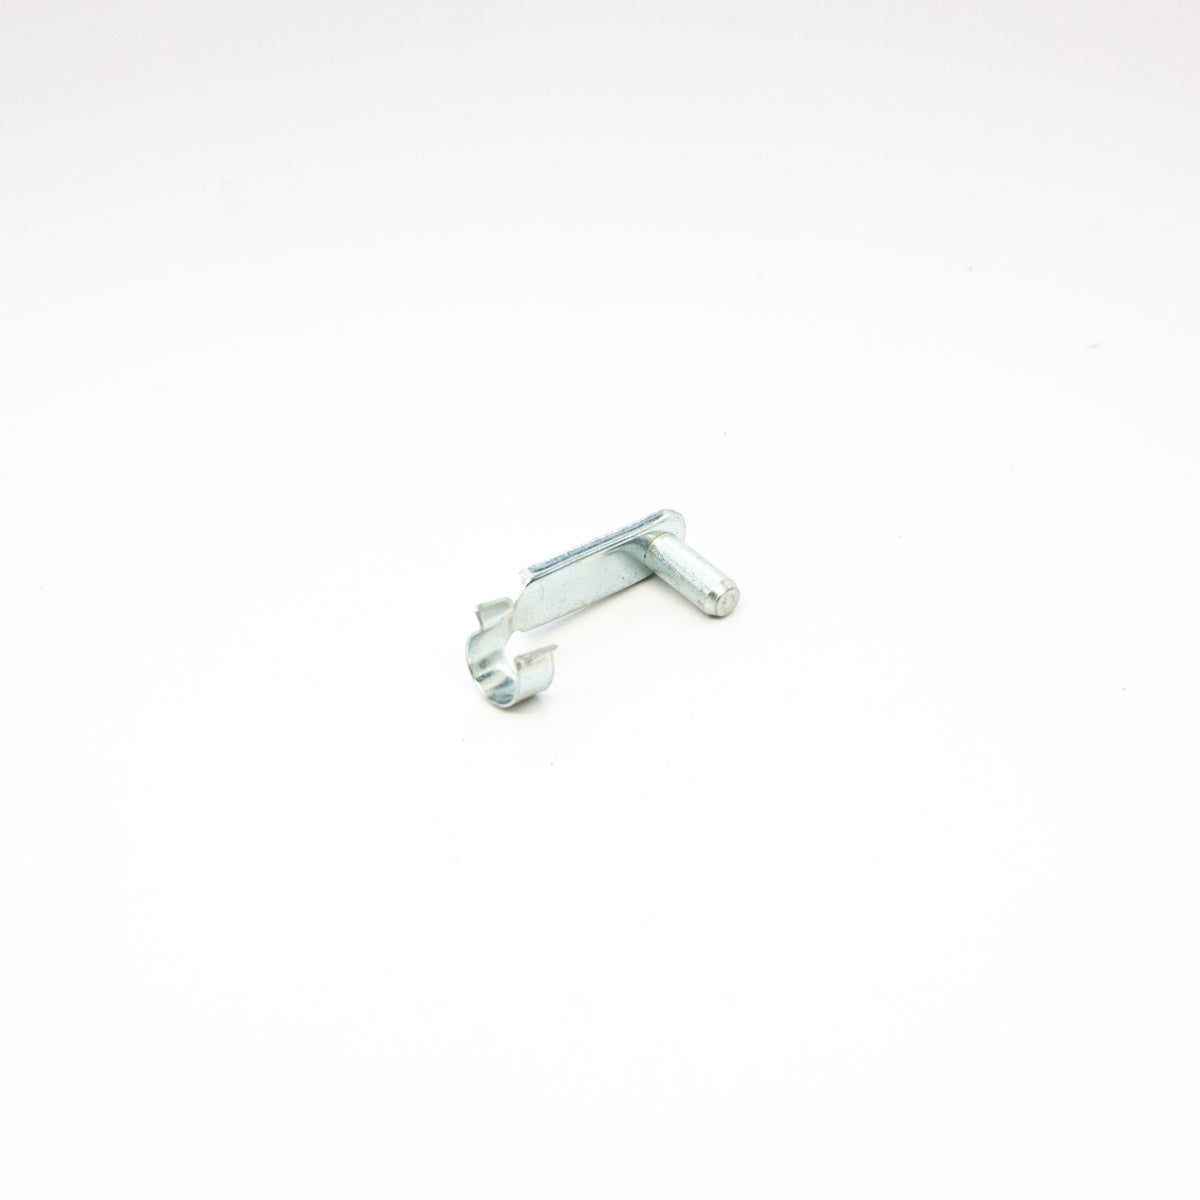 Safety Pin Cotter Pin 6X24mm